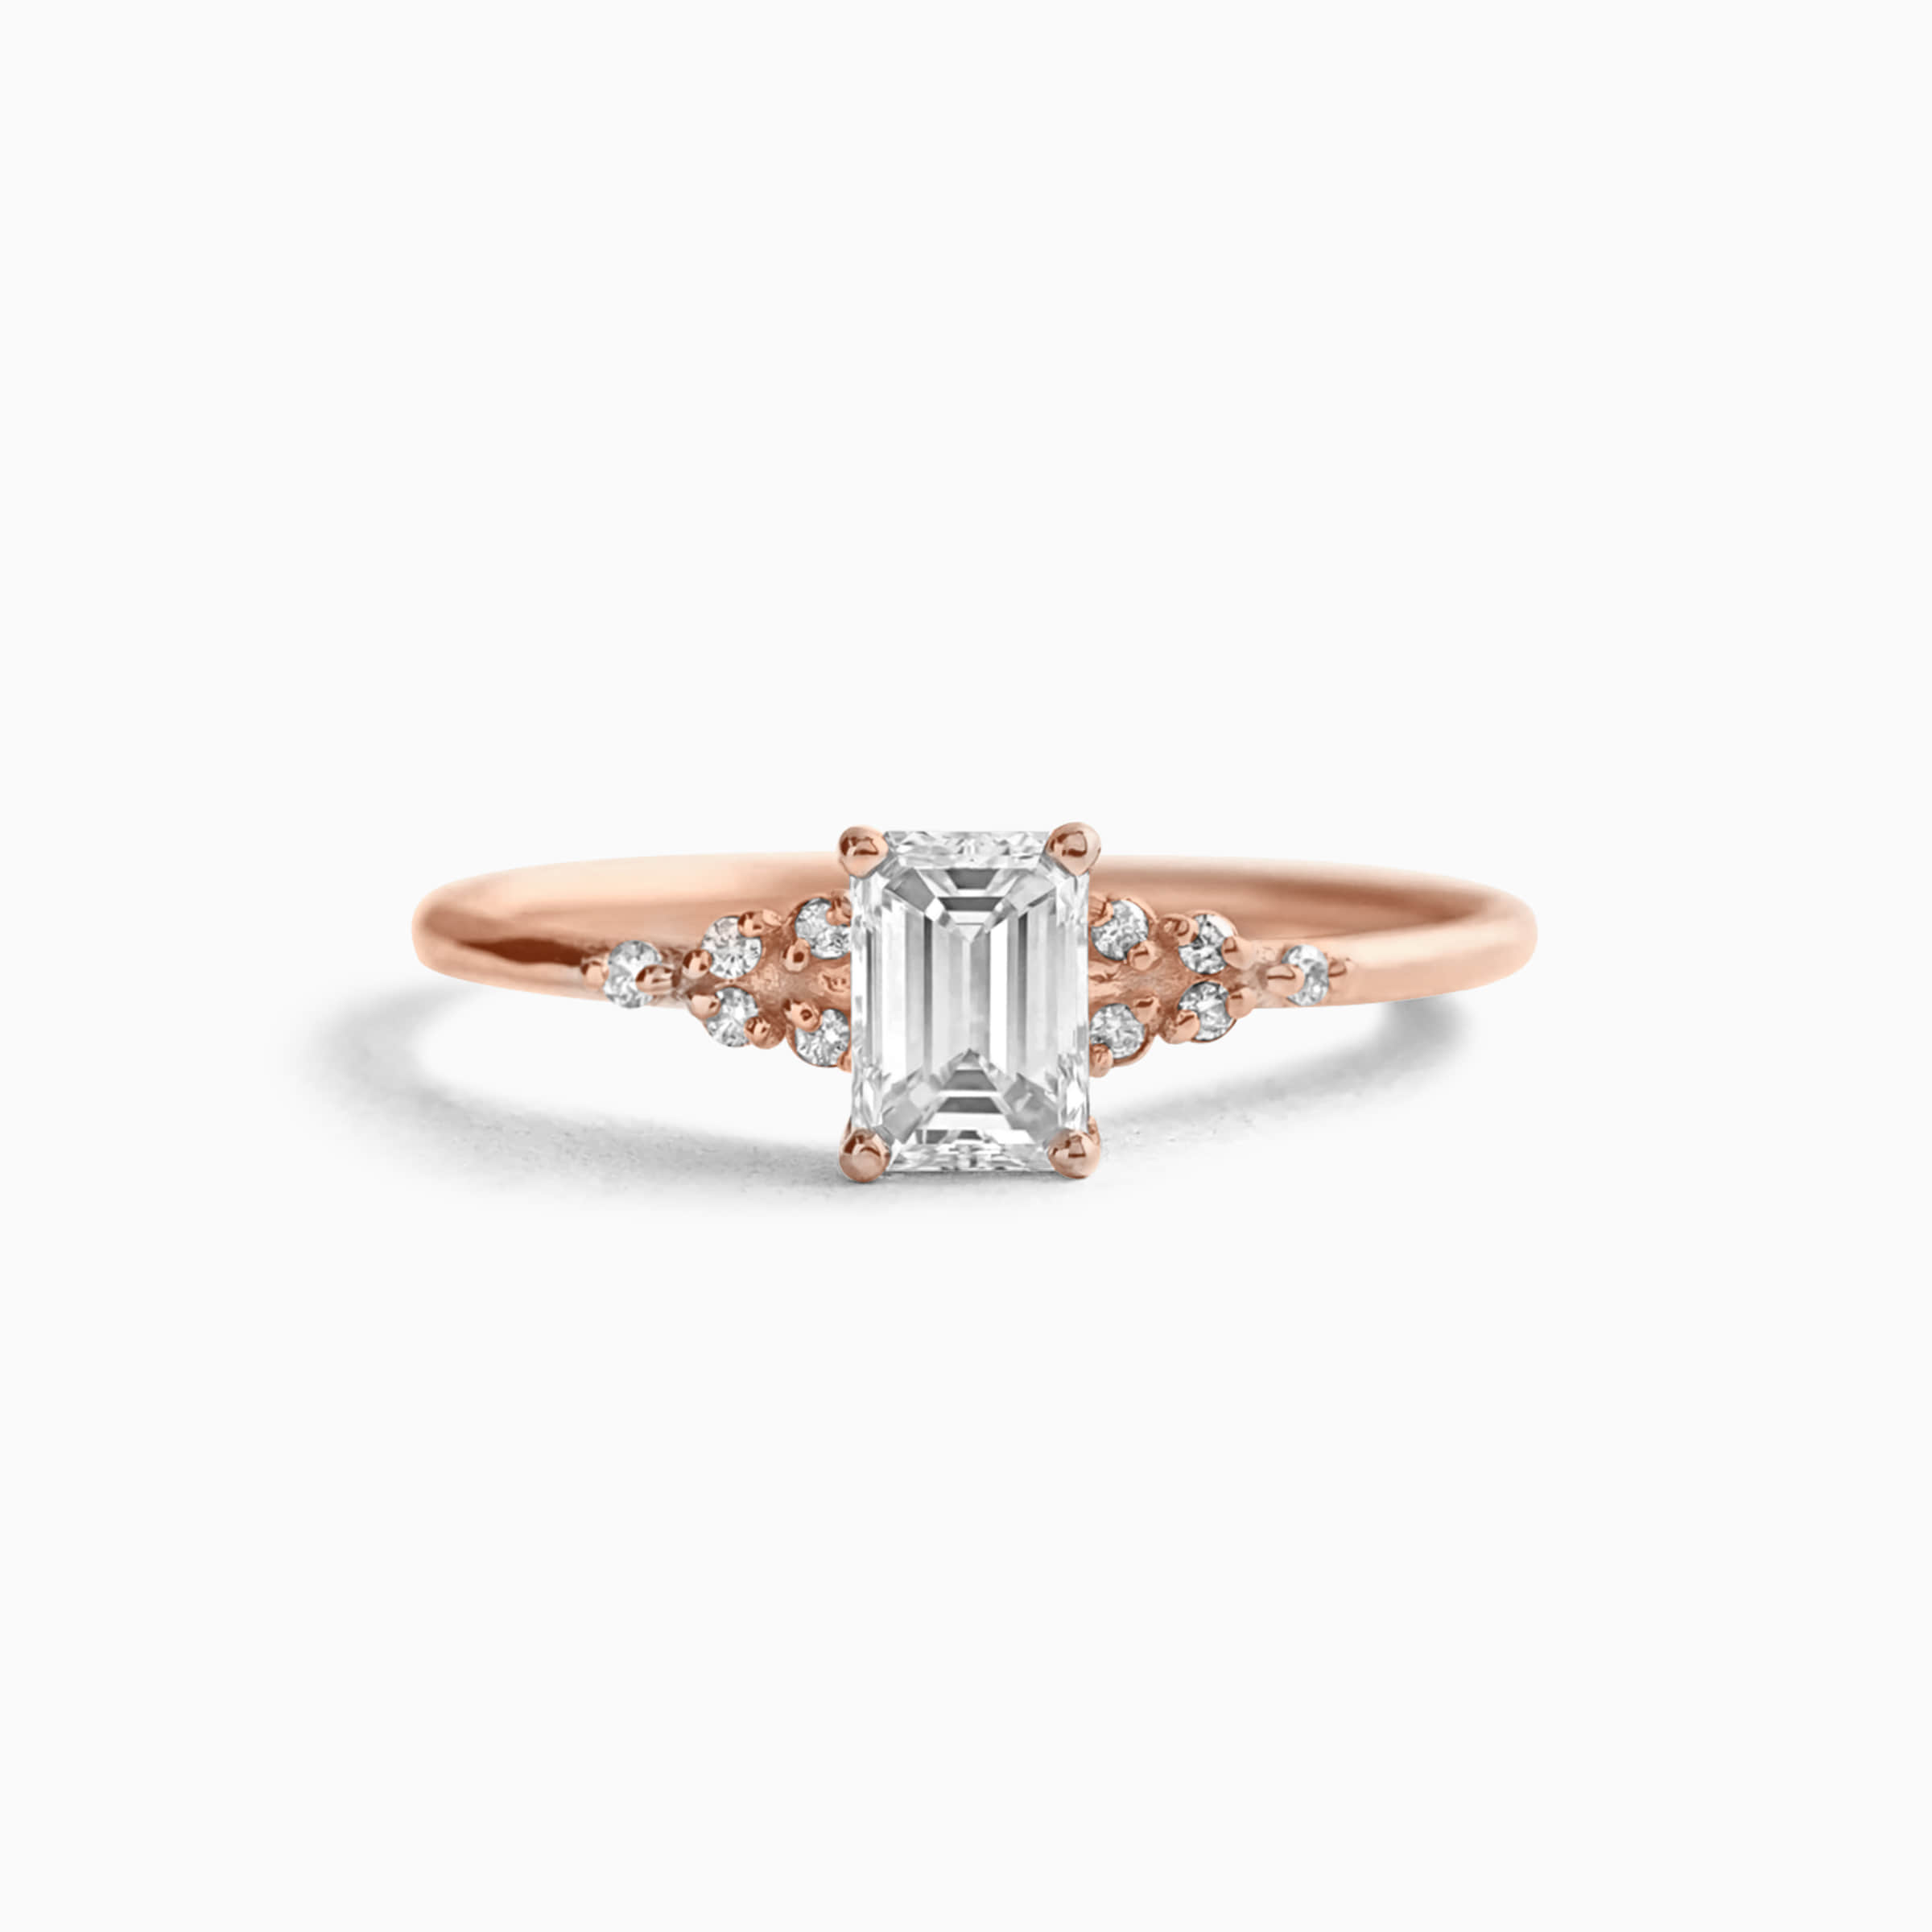 Darry Ring antiuqe emerald cut engagement ring in rose gold